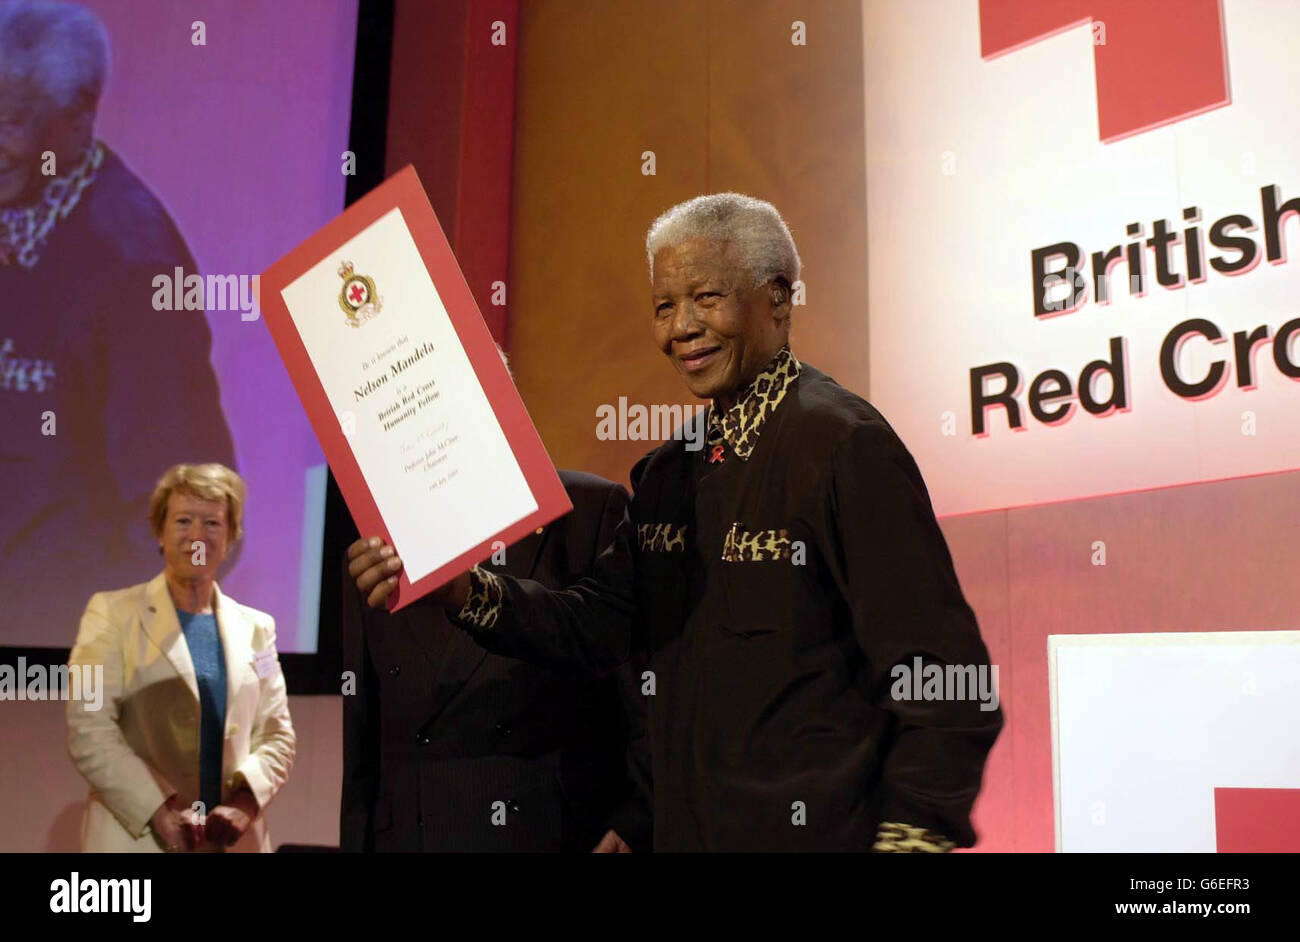 Former South African President Nelson Mandela collects his Red Cross Humanity Fellowship Award after having delivered a lecture in aid of the British Red Cross at the Queen Elizabeth II Conference Centre in central London. * Mr Mandela was presented with the Red Cross Humanity Fellowship Award by Dr Jacques Moreillon, the Red Cross delegate who visited Mr Mandela in prison in the early 1970's. Mr Mandela also highlighted the AIDS crisis in Southern Africa and stressed the need for rapid and real progress in AIDS treatments for all. Stock Photo